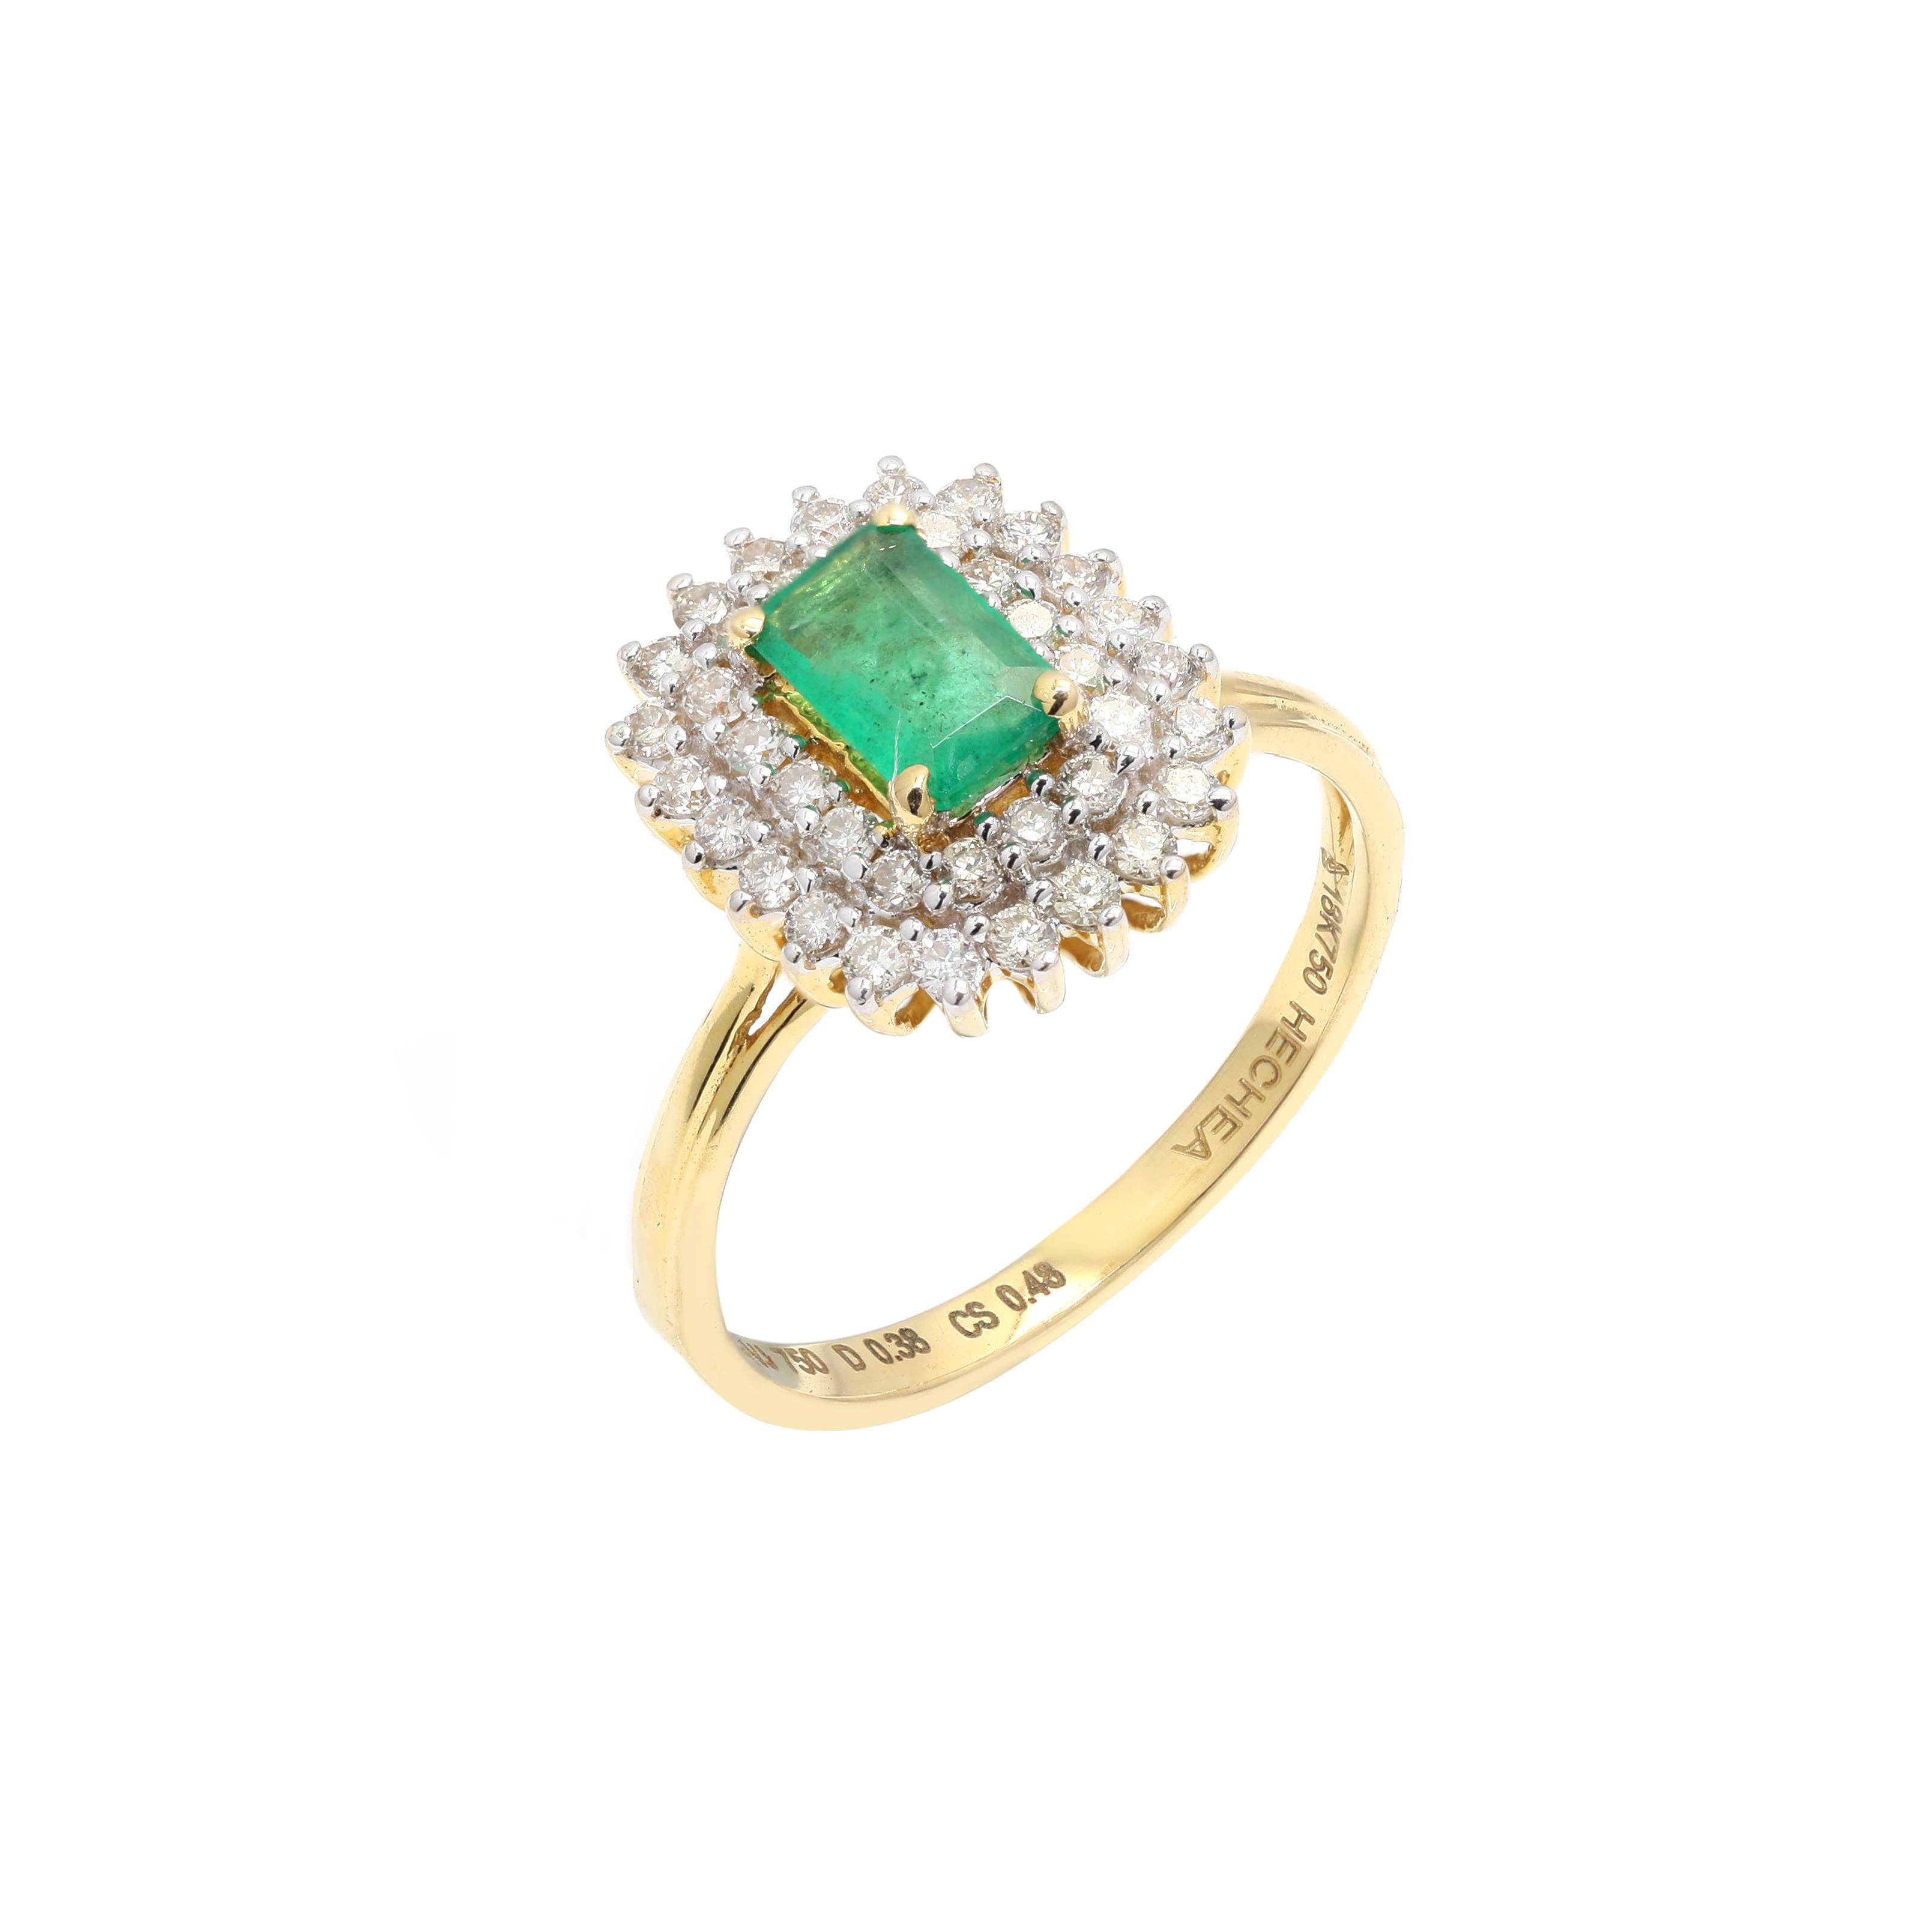 For Sale:  Bespoke Octagon Cut Emerald Amidst of Diamond Wedding Ring in 18k Yellow Gold 4